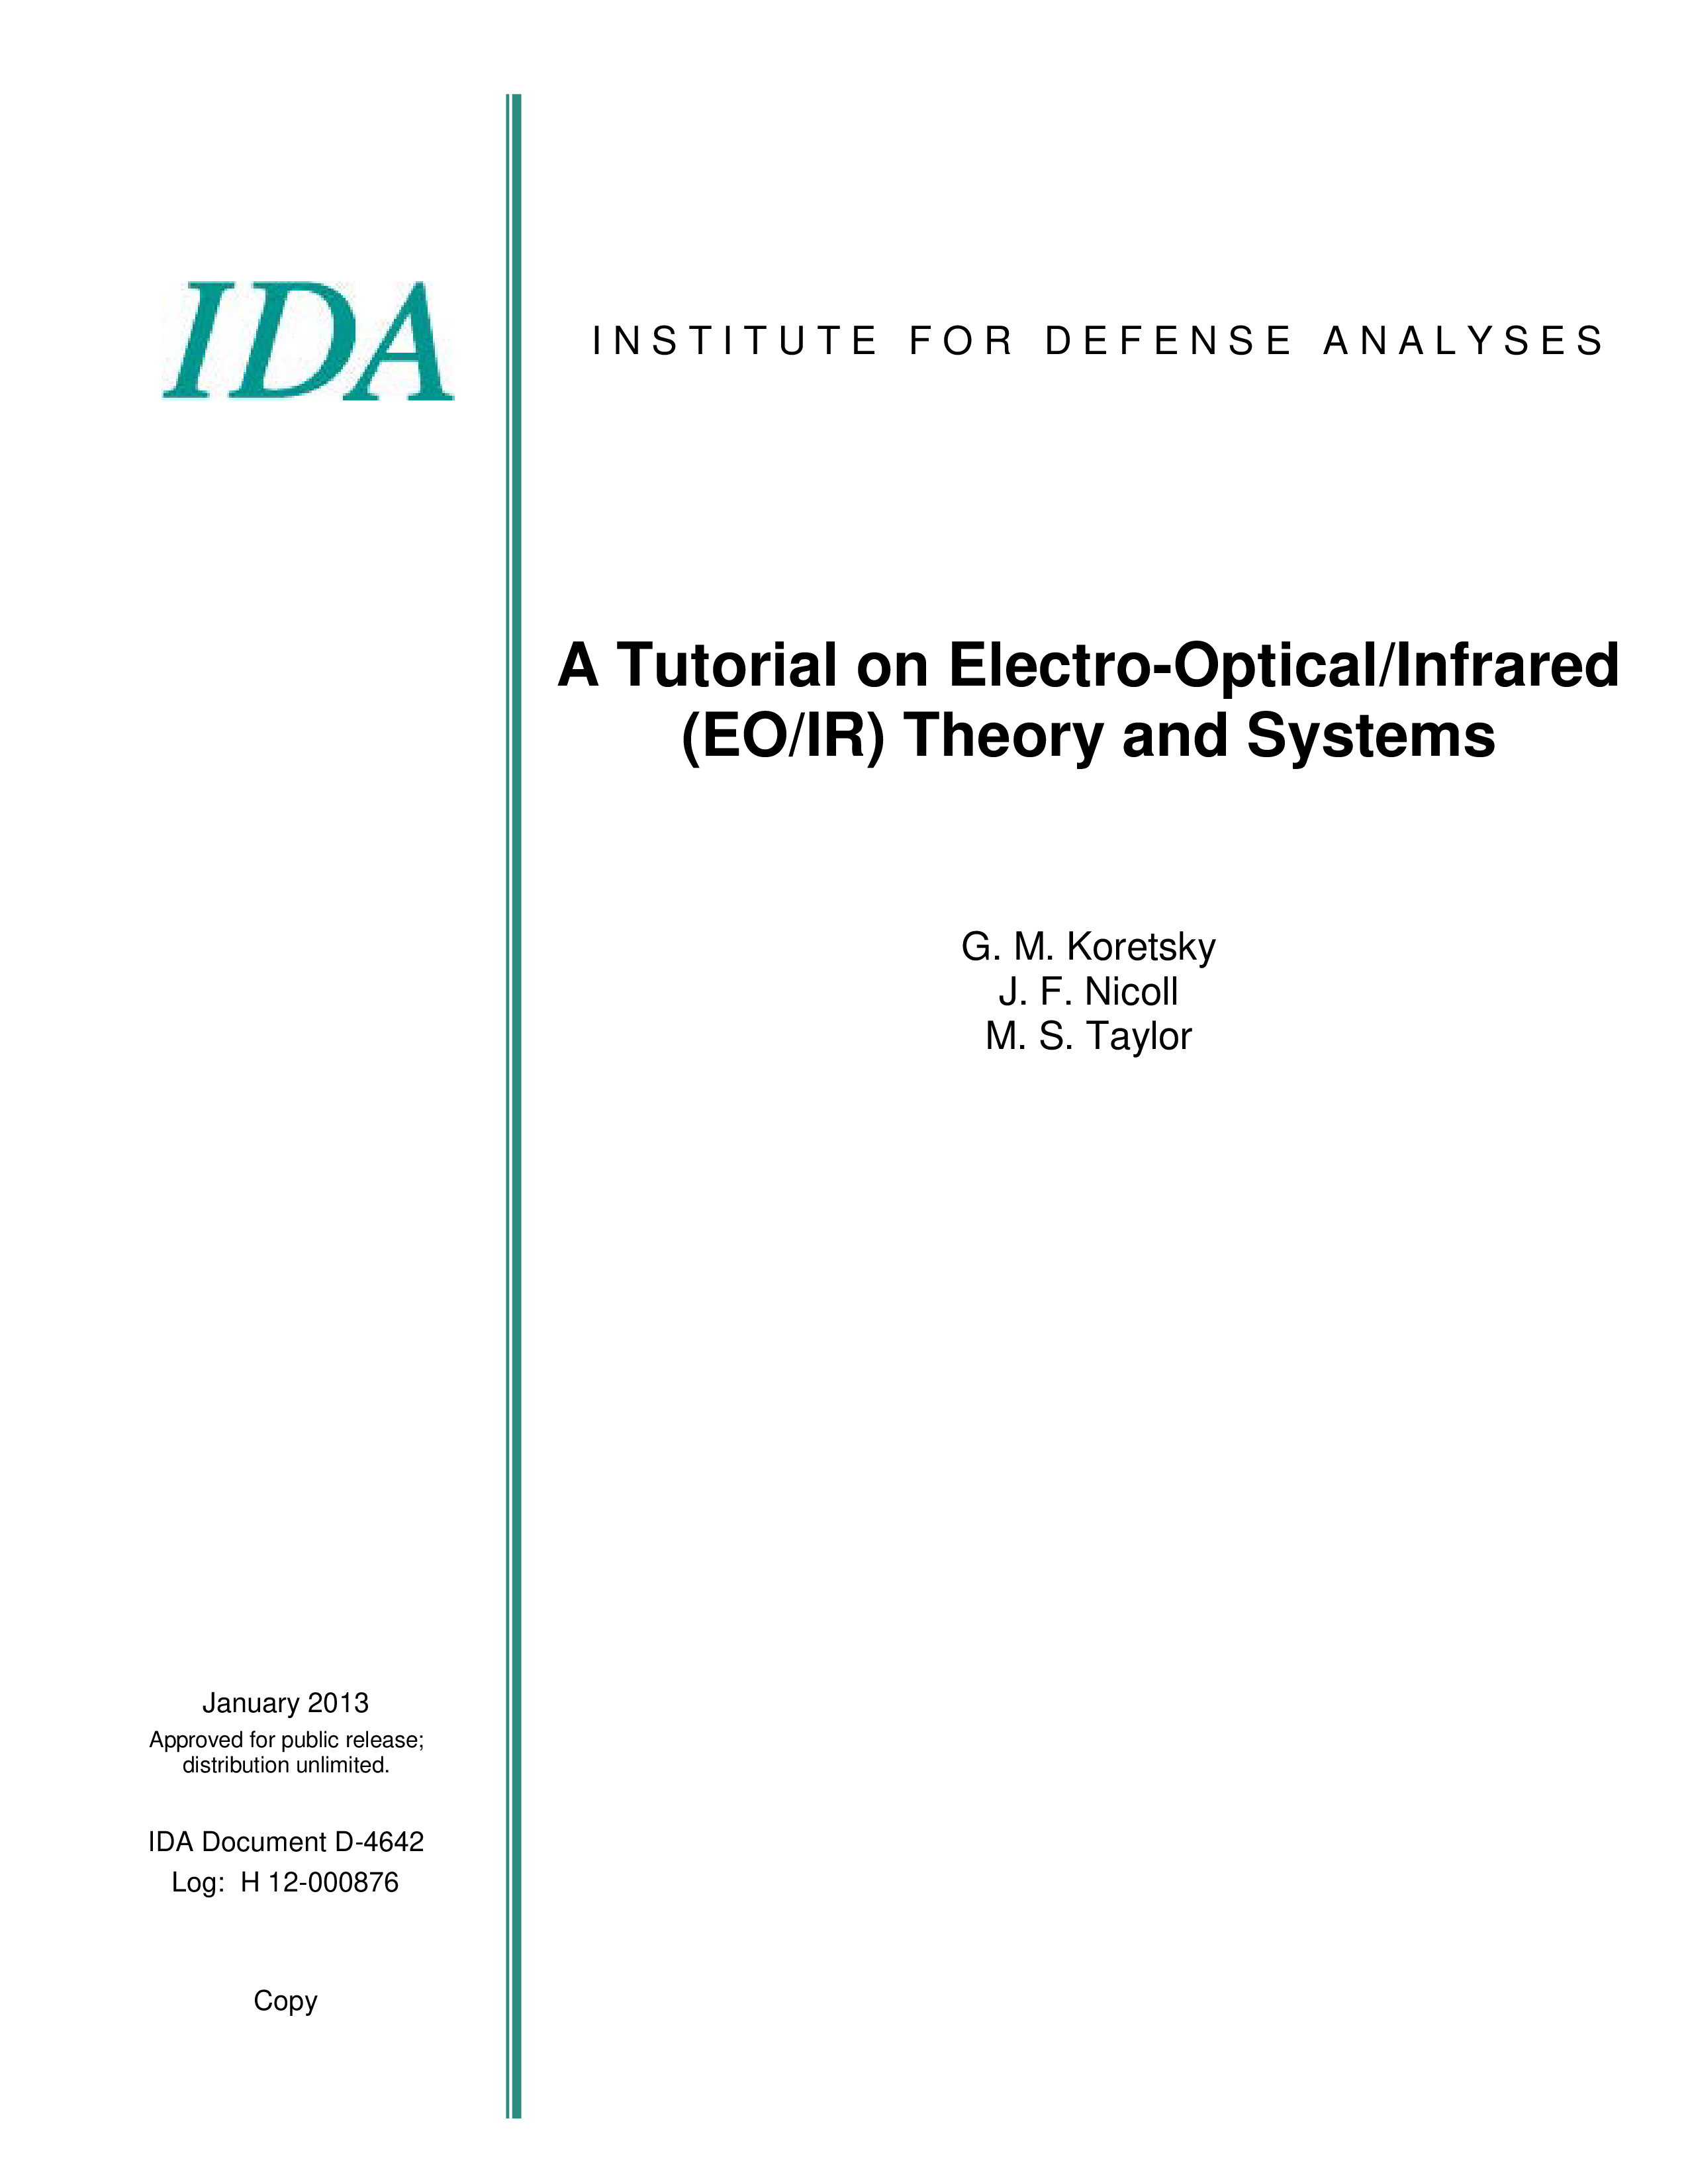 document cover, A Tutorial on Electro-Optical/Infrared (EO/IR) Theory and Systems